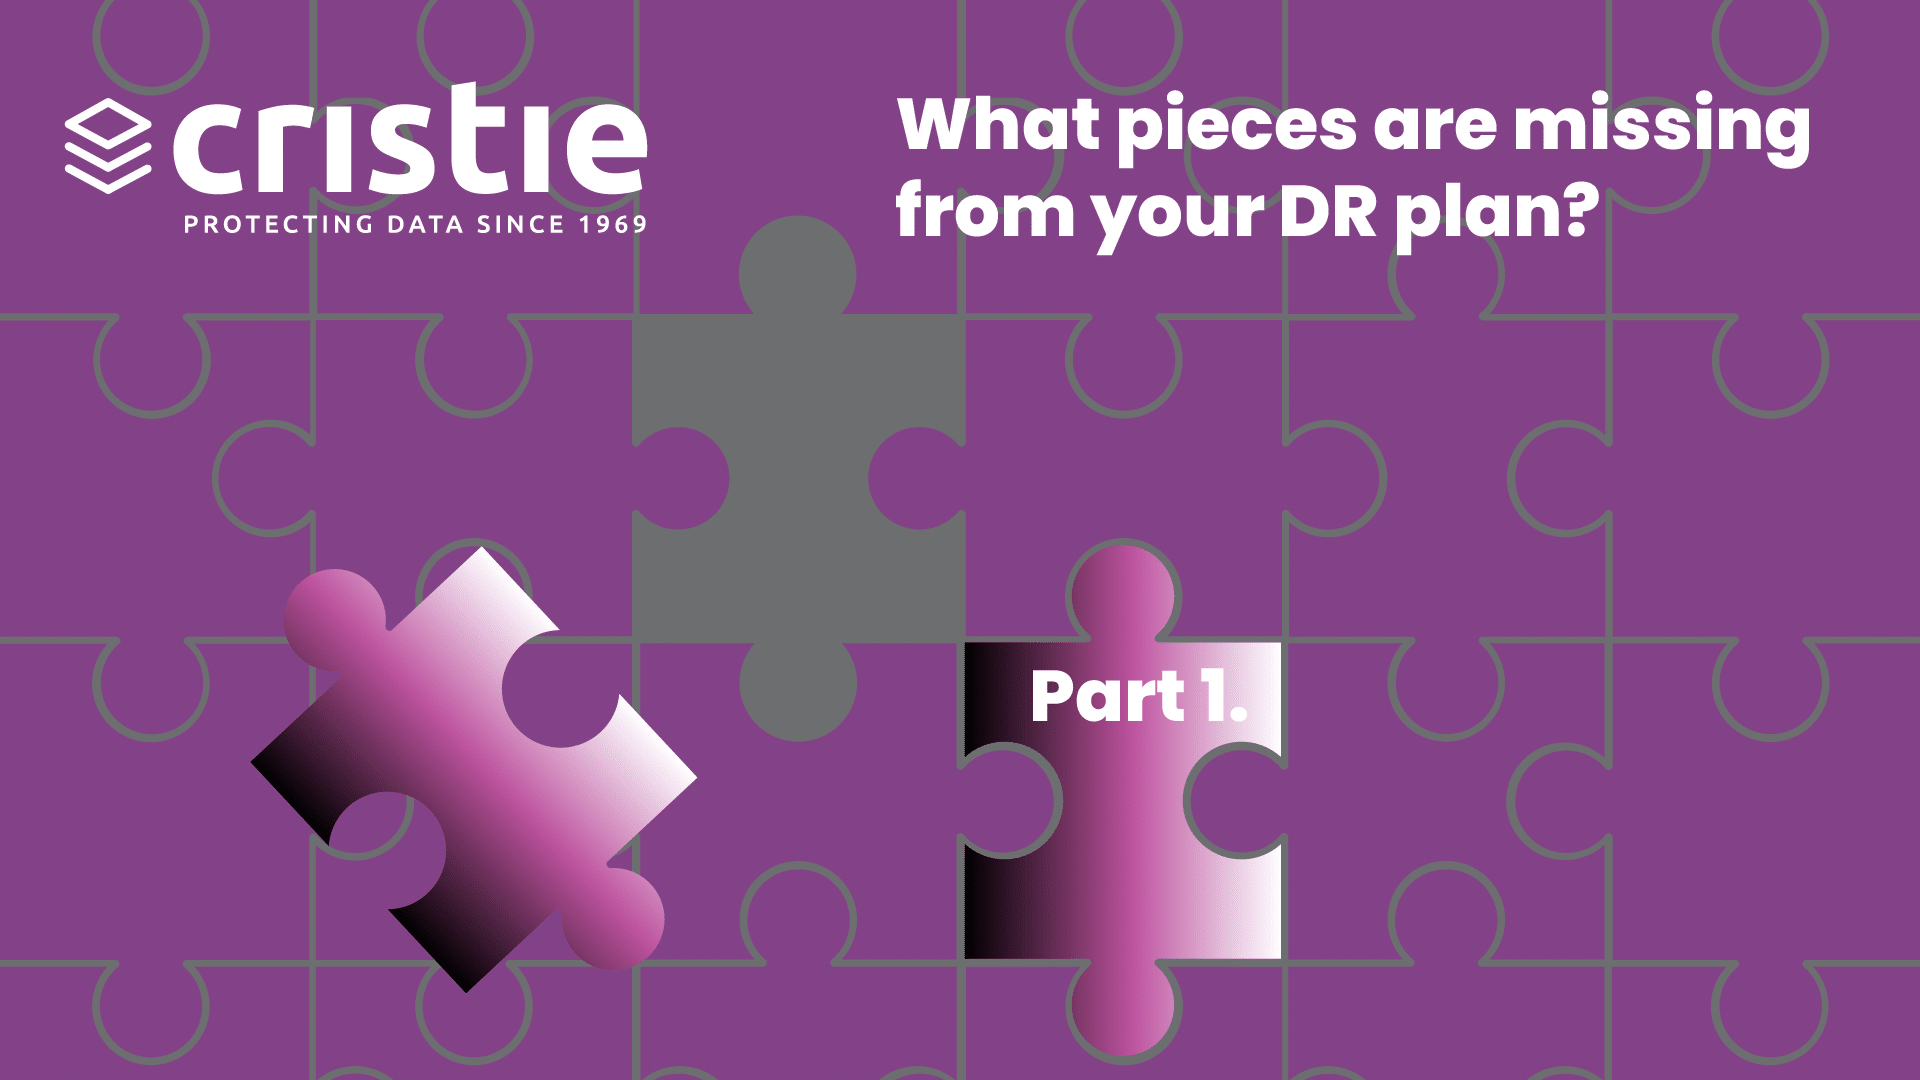 What pieces are missing from your DR plan? Part 1.